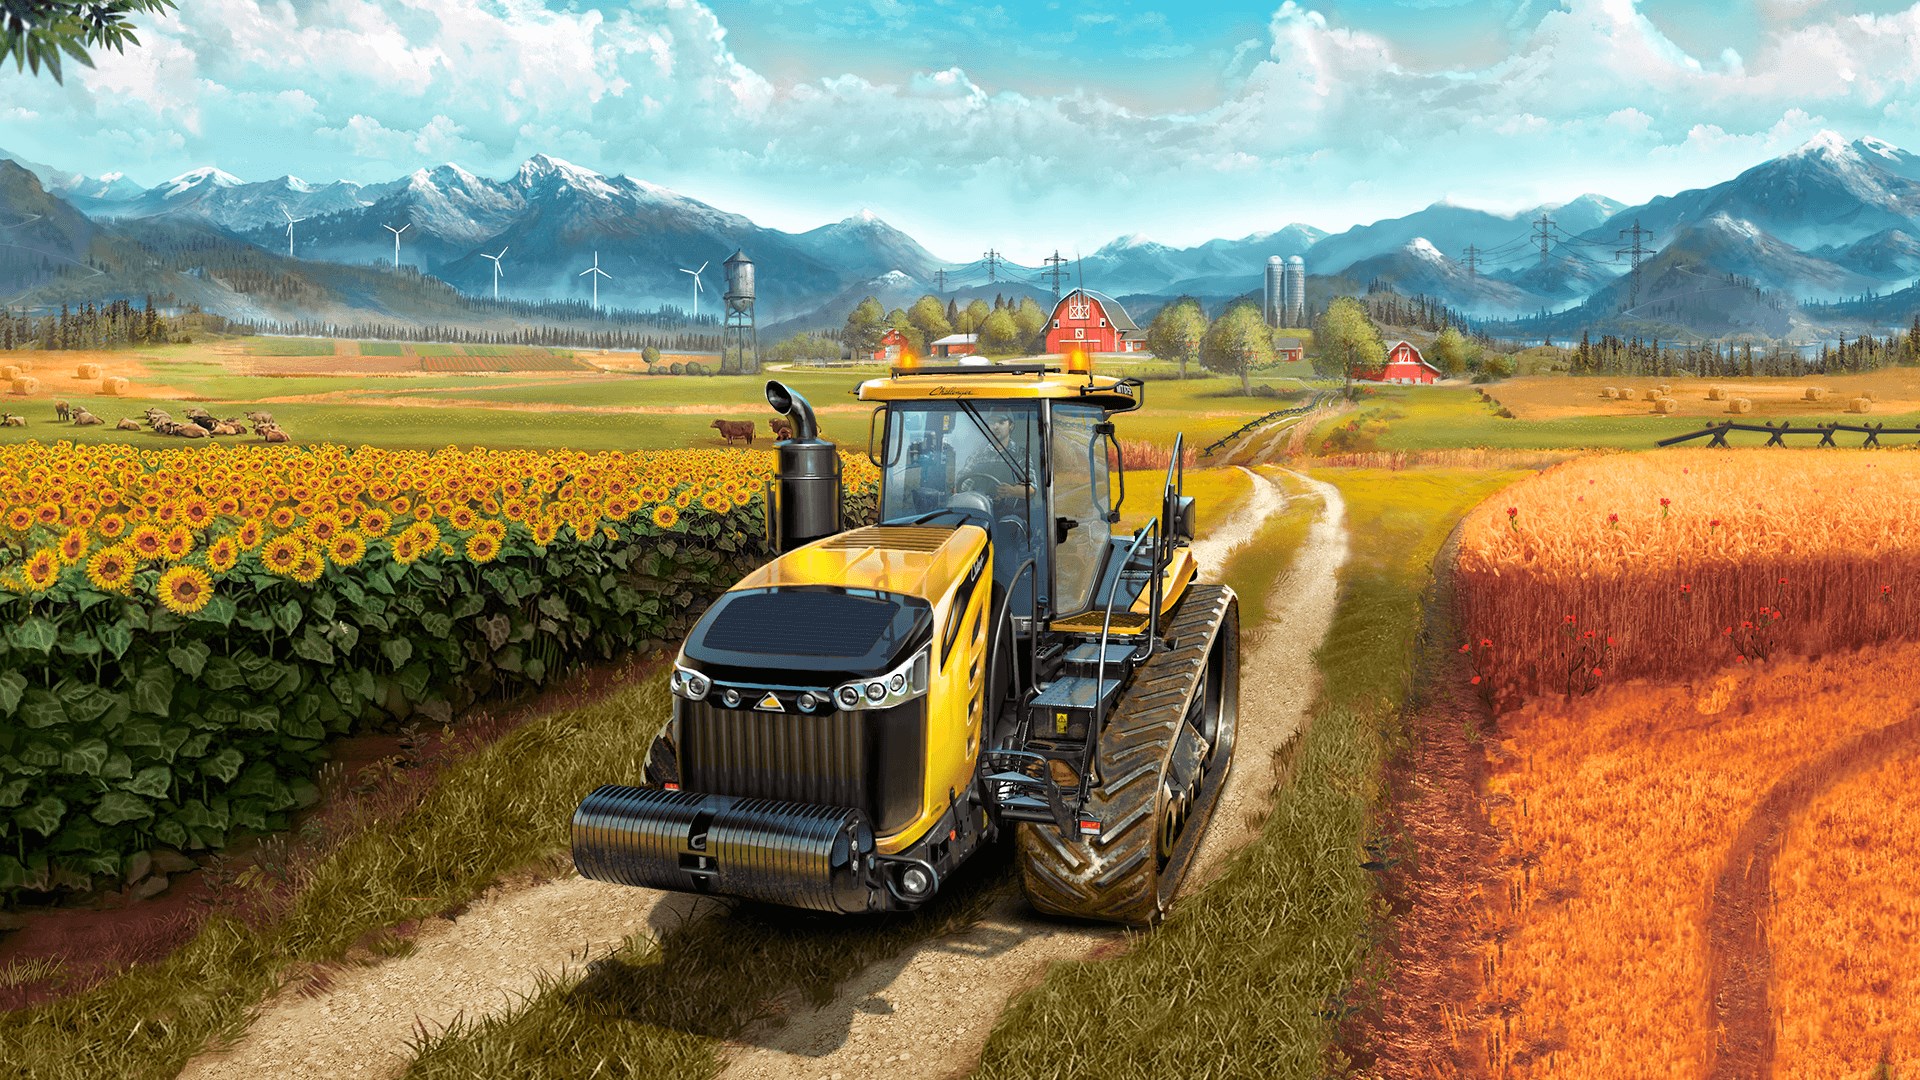 Find the best laptops for Farming Simulator 17